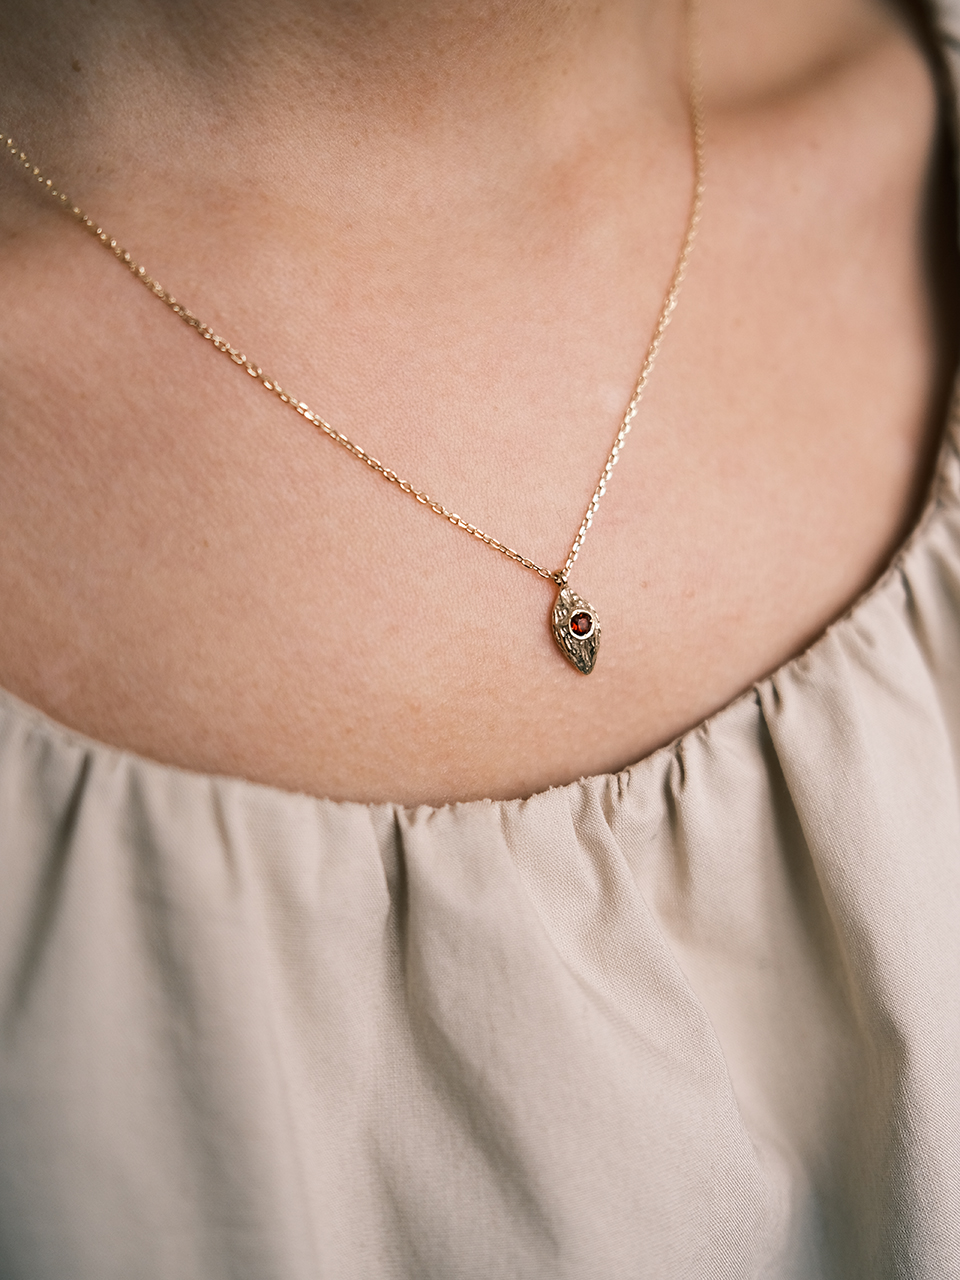 Tiny Seed Necklace